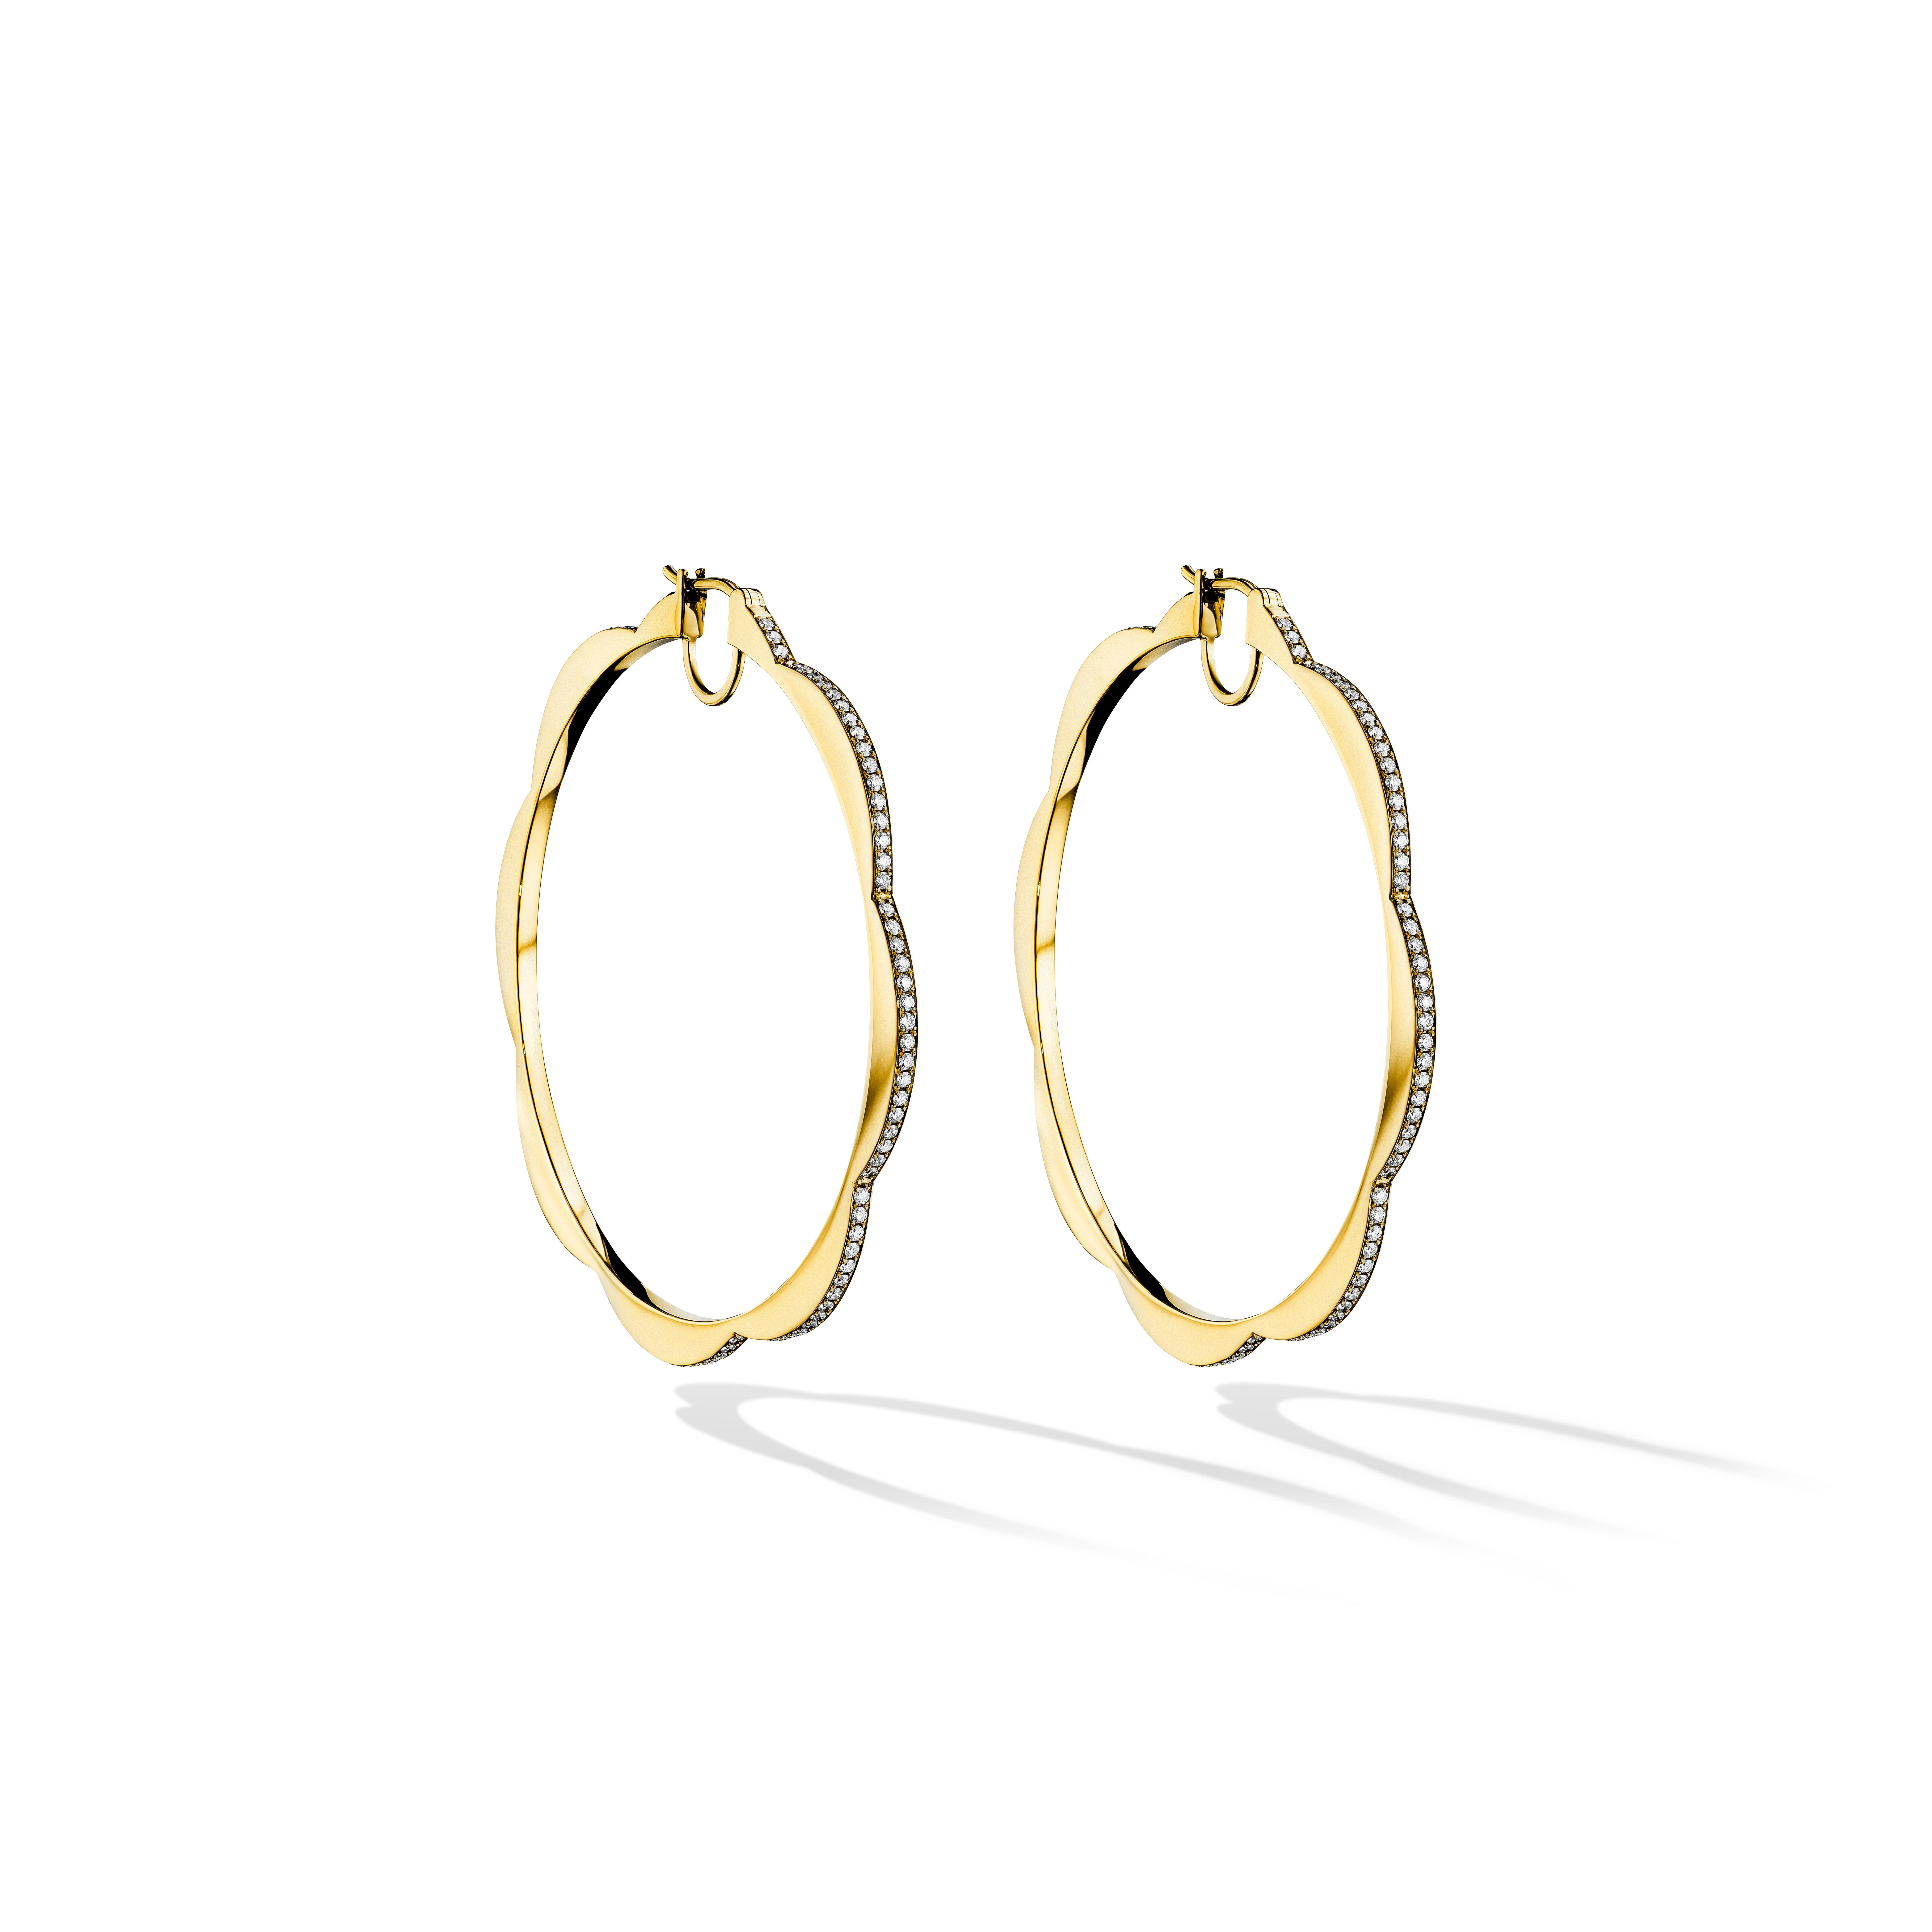 Playful and sexy, these Jumbo Bloom Triplet hoops will definitely get a lot of attention. Wear one with white diamonds in front, and the other with the black diamonds in front for a fun and cool look.

18K Gold TRIPLET Hoop Earrings with Black